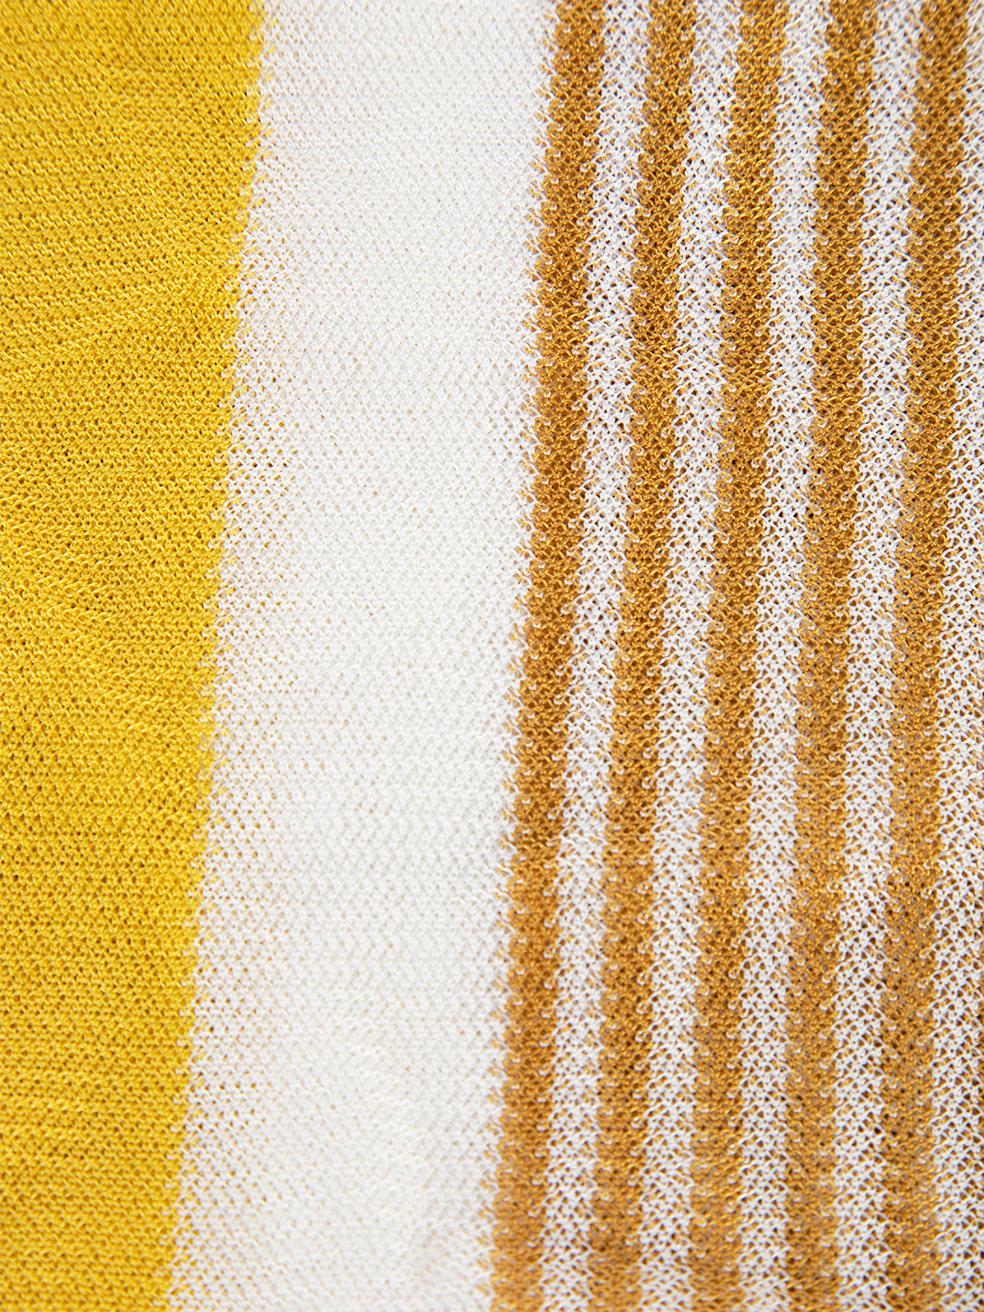 CONDITION is Never worn, with tags. No visible wear to scarf is evident on this new Missoni designer resale item. Details Yellow, white Striped Viscose Material Stretchy material Made in Italy Composition 100% Viscose Size & Fit Length: 212cm/83in